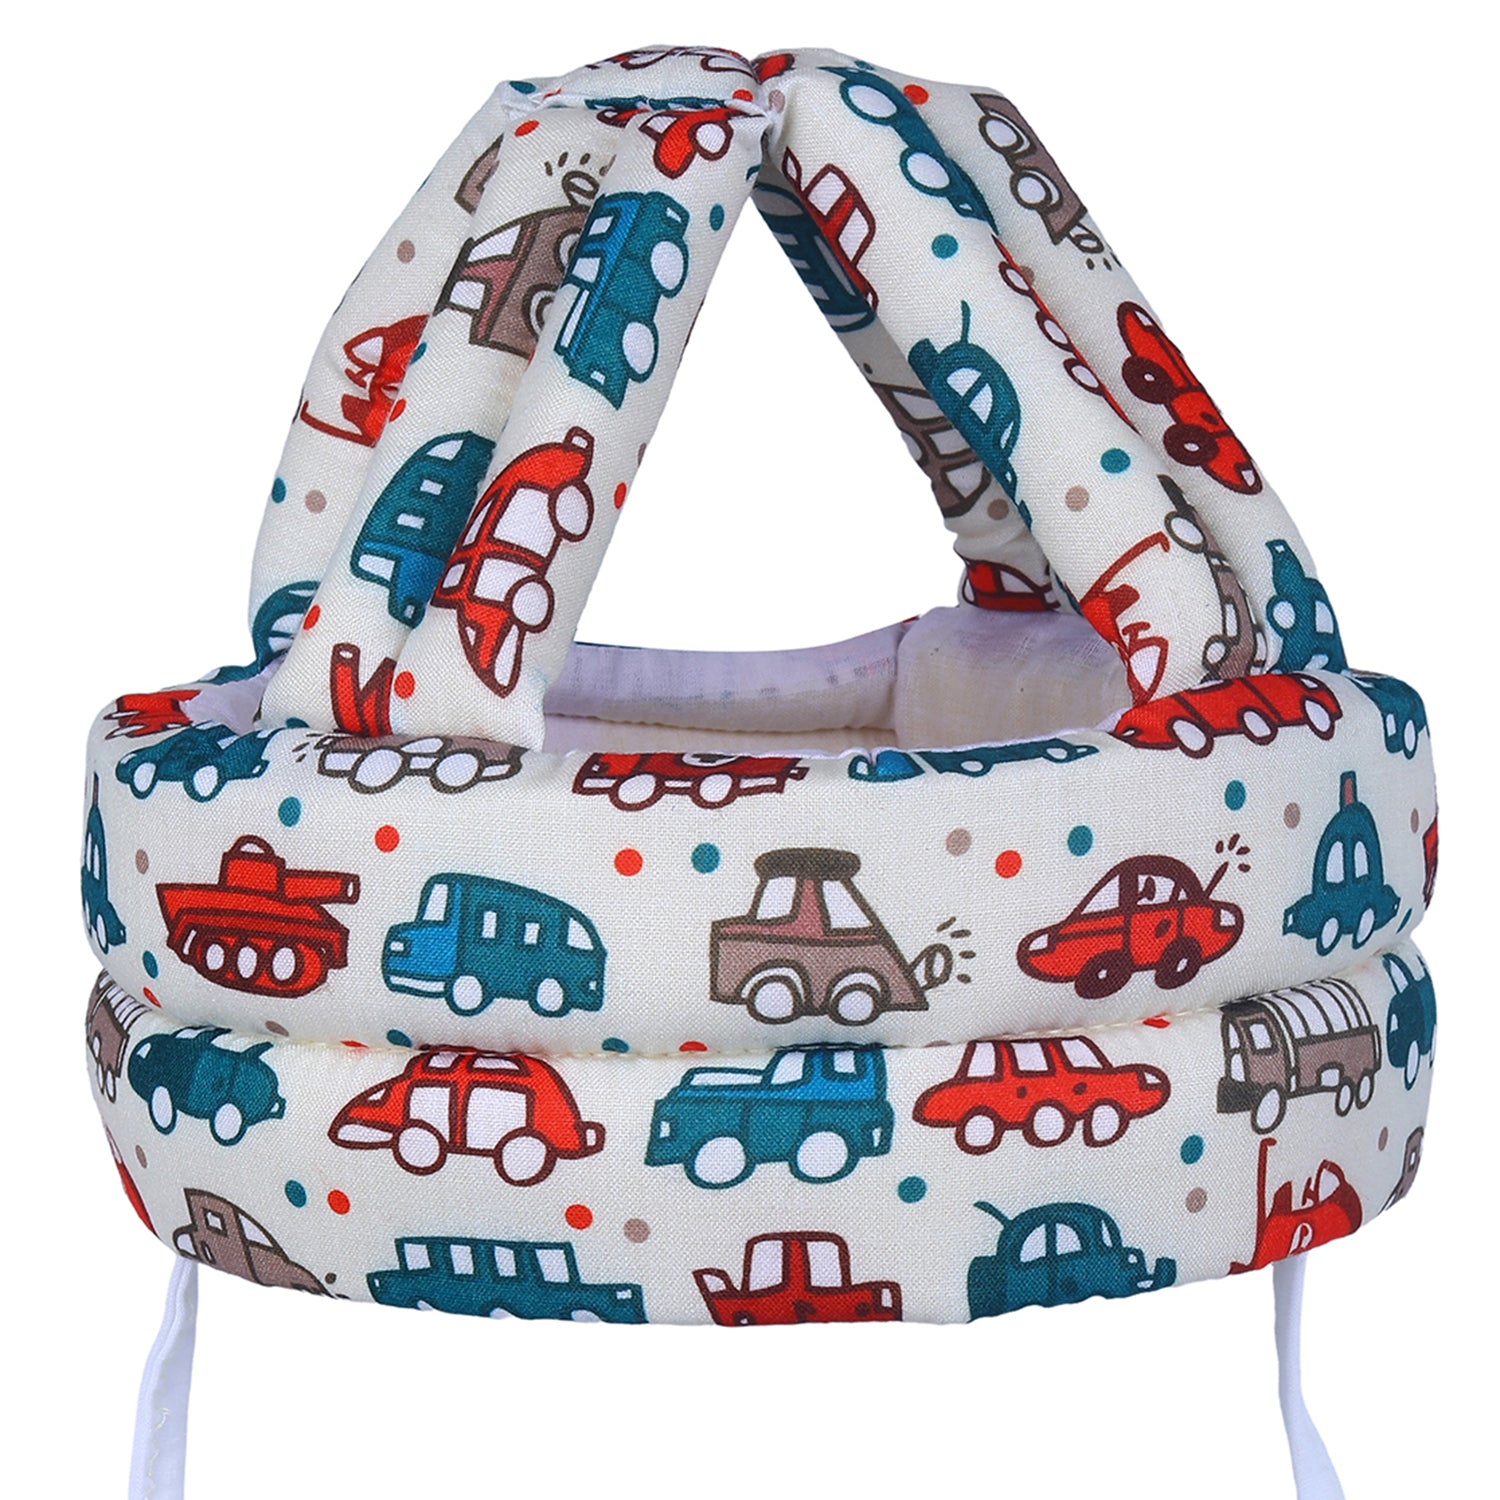 Baby Moo Car & Truck Head Protection Adjustable Cushioned Safety Helmet - Cream